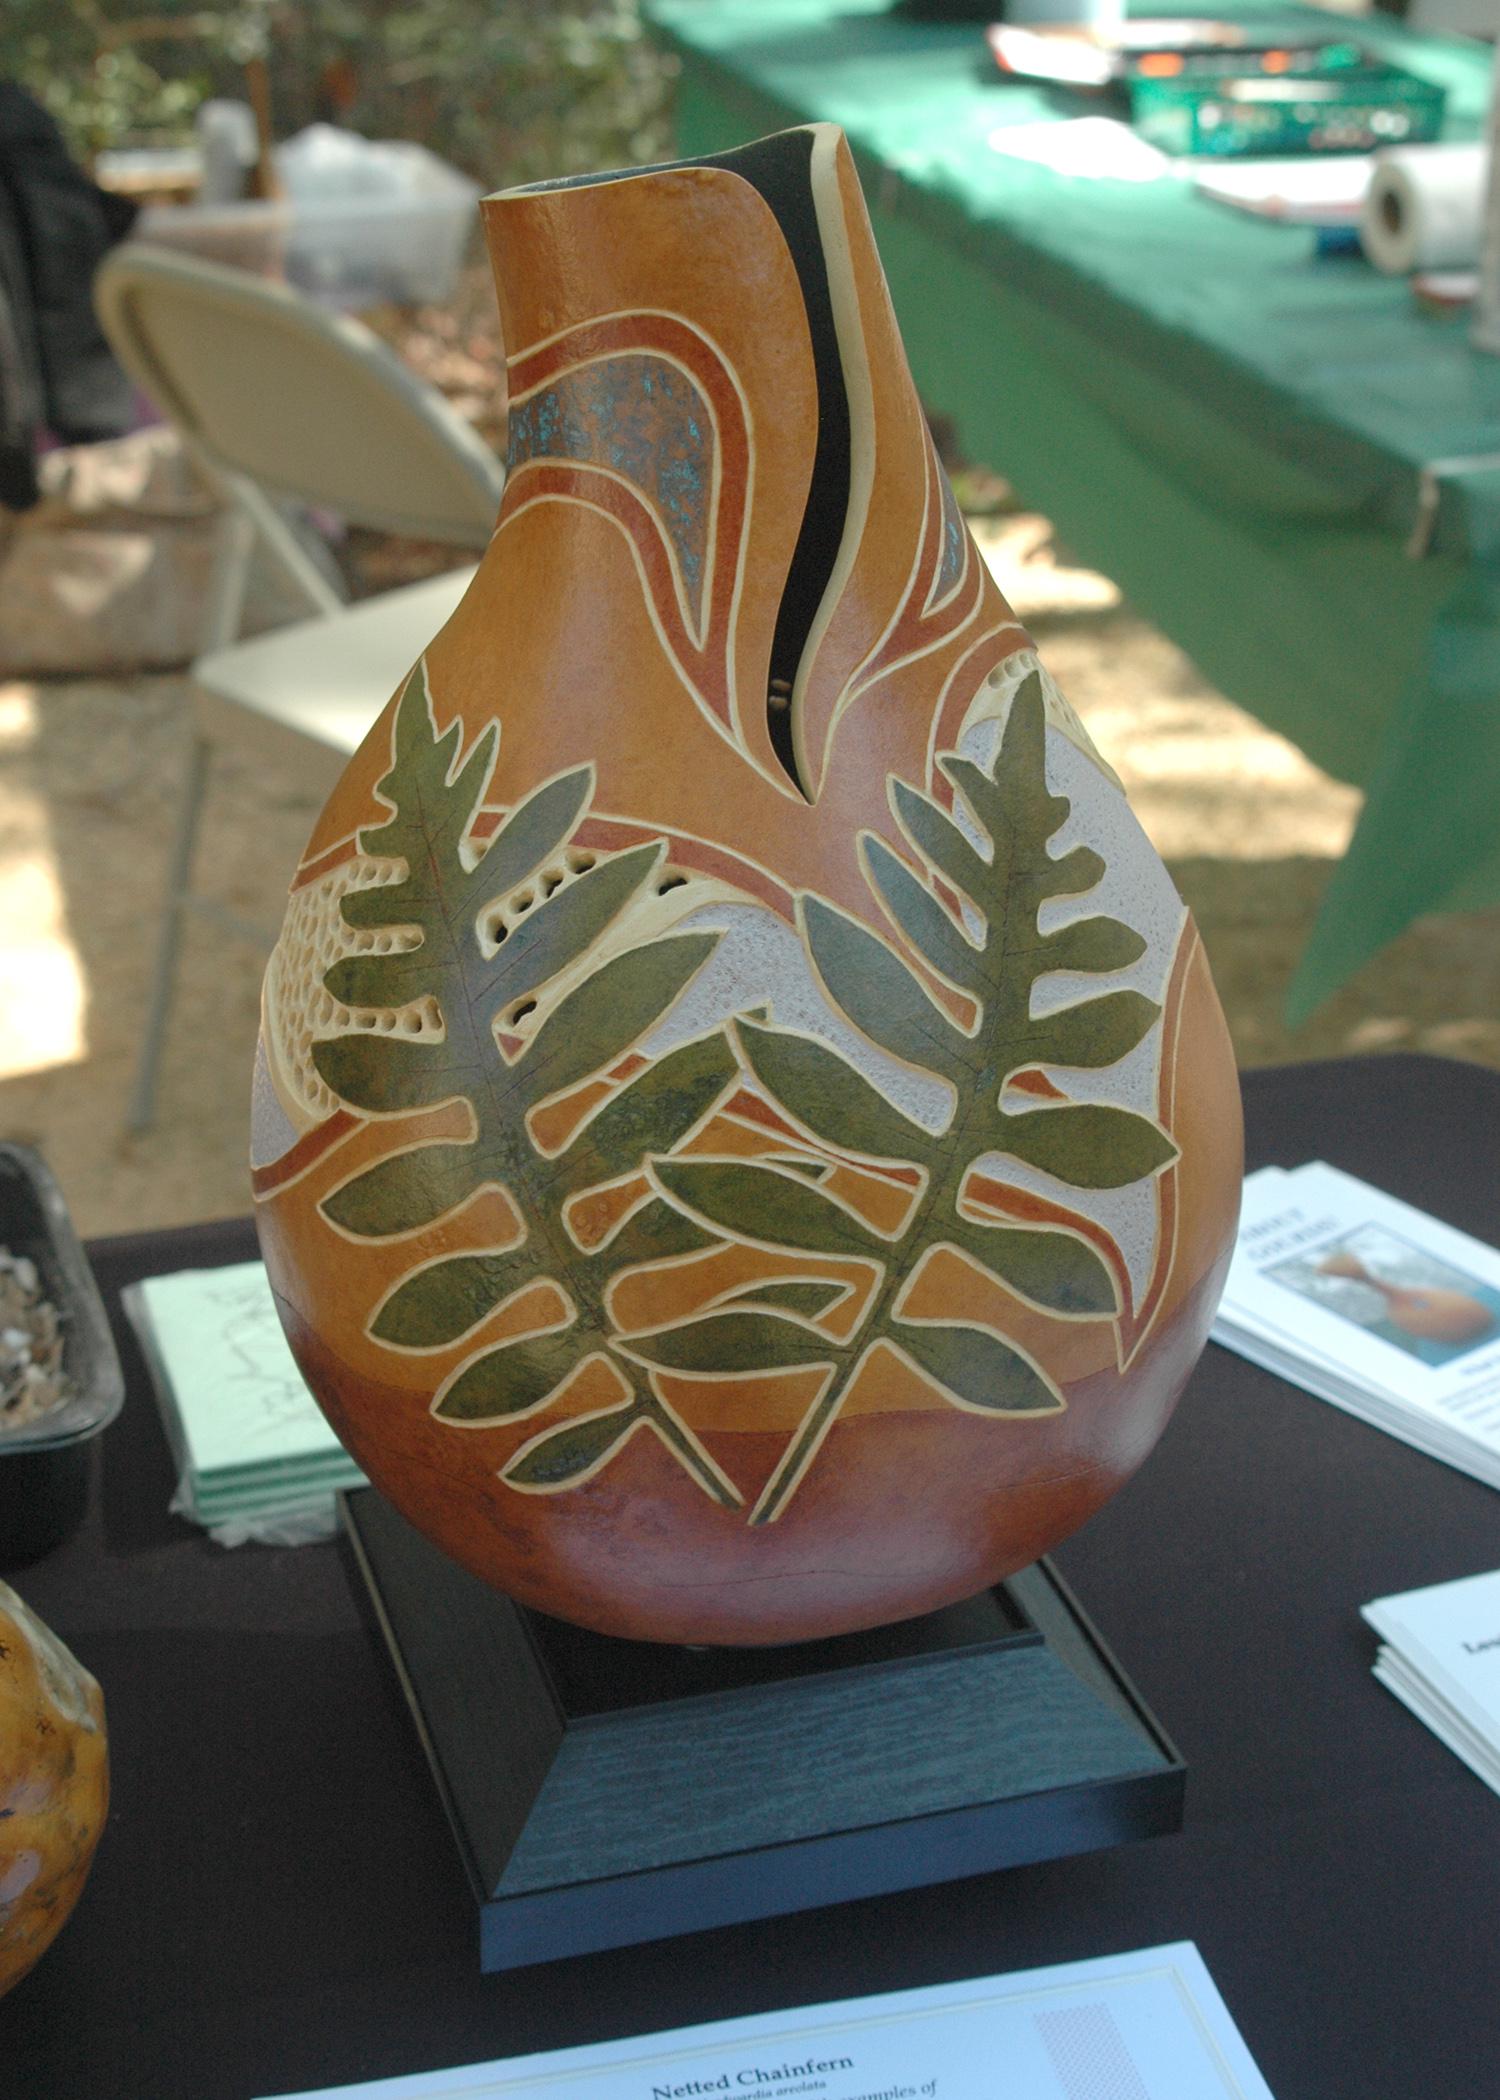 Janet Schlauderaff displayed one of her decorative gourds during the 2012 Piney Woods Heritage Festival at the Crosby Arboretum in Picayune. Schlauderaff’s decorative and functional gourds will be on exhibit in the arboretum’s new art gallery from Sept. 1 to Nov. 30. (Photo by MSU Ag Communications/Susan Collins-Smith)